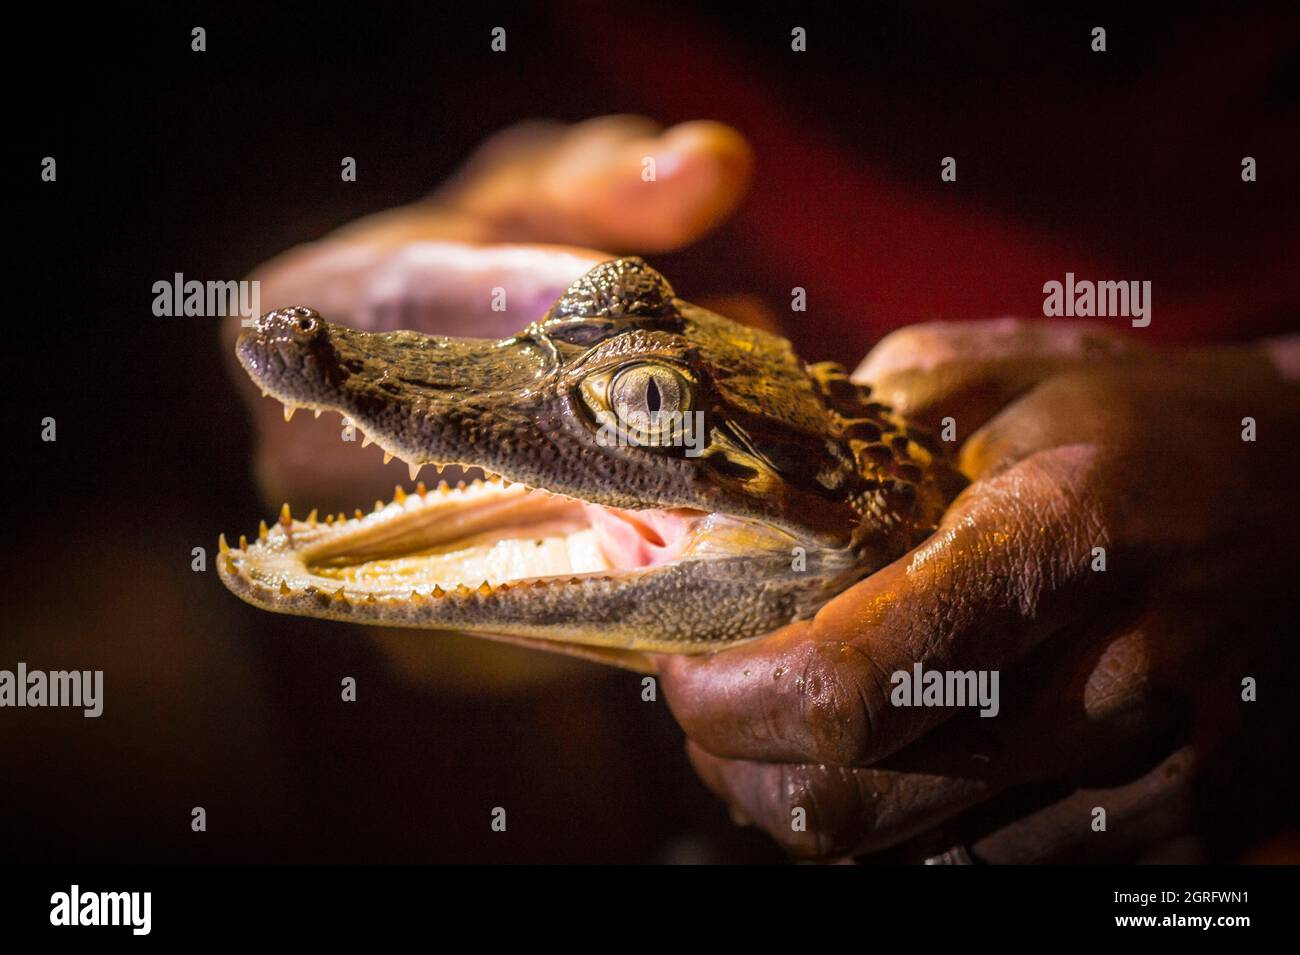 France, French Guiana, Kaw marshes, nocturnal observation of a Common Caiman (Caiman crocodilus) Stock Photo